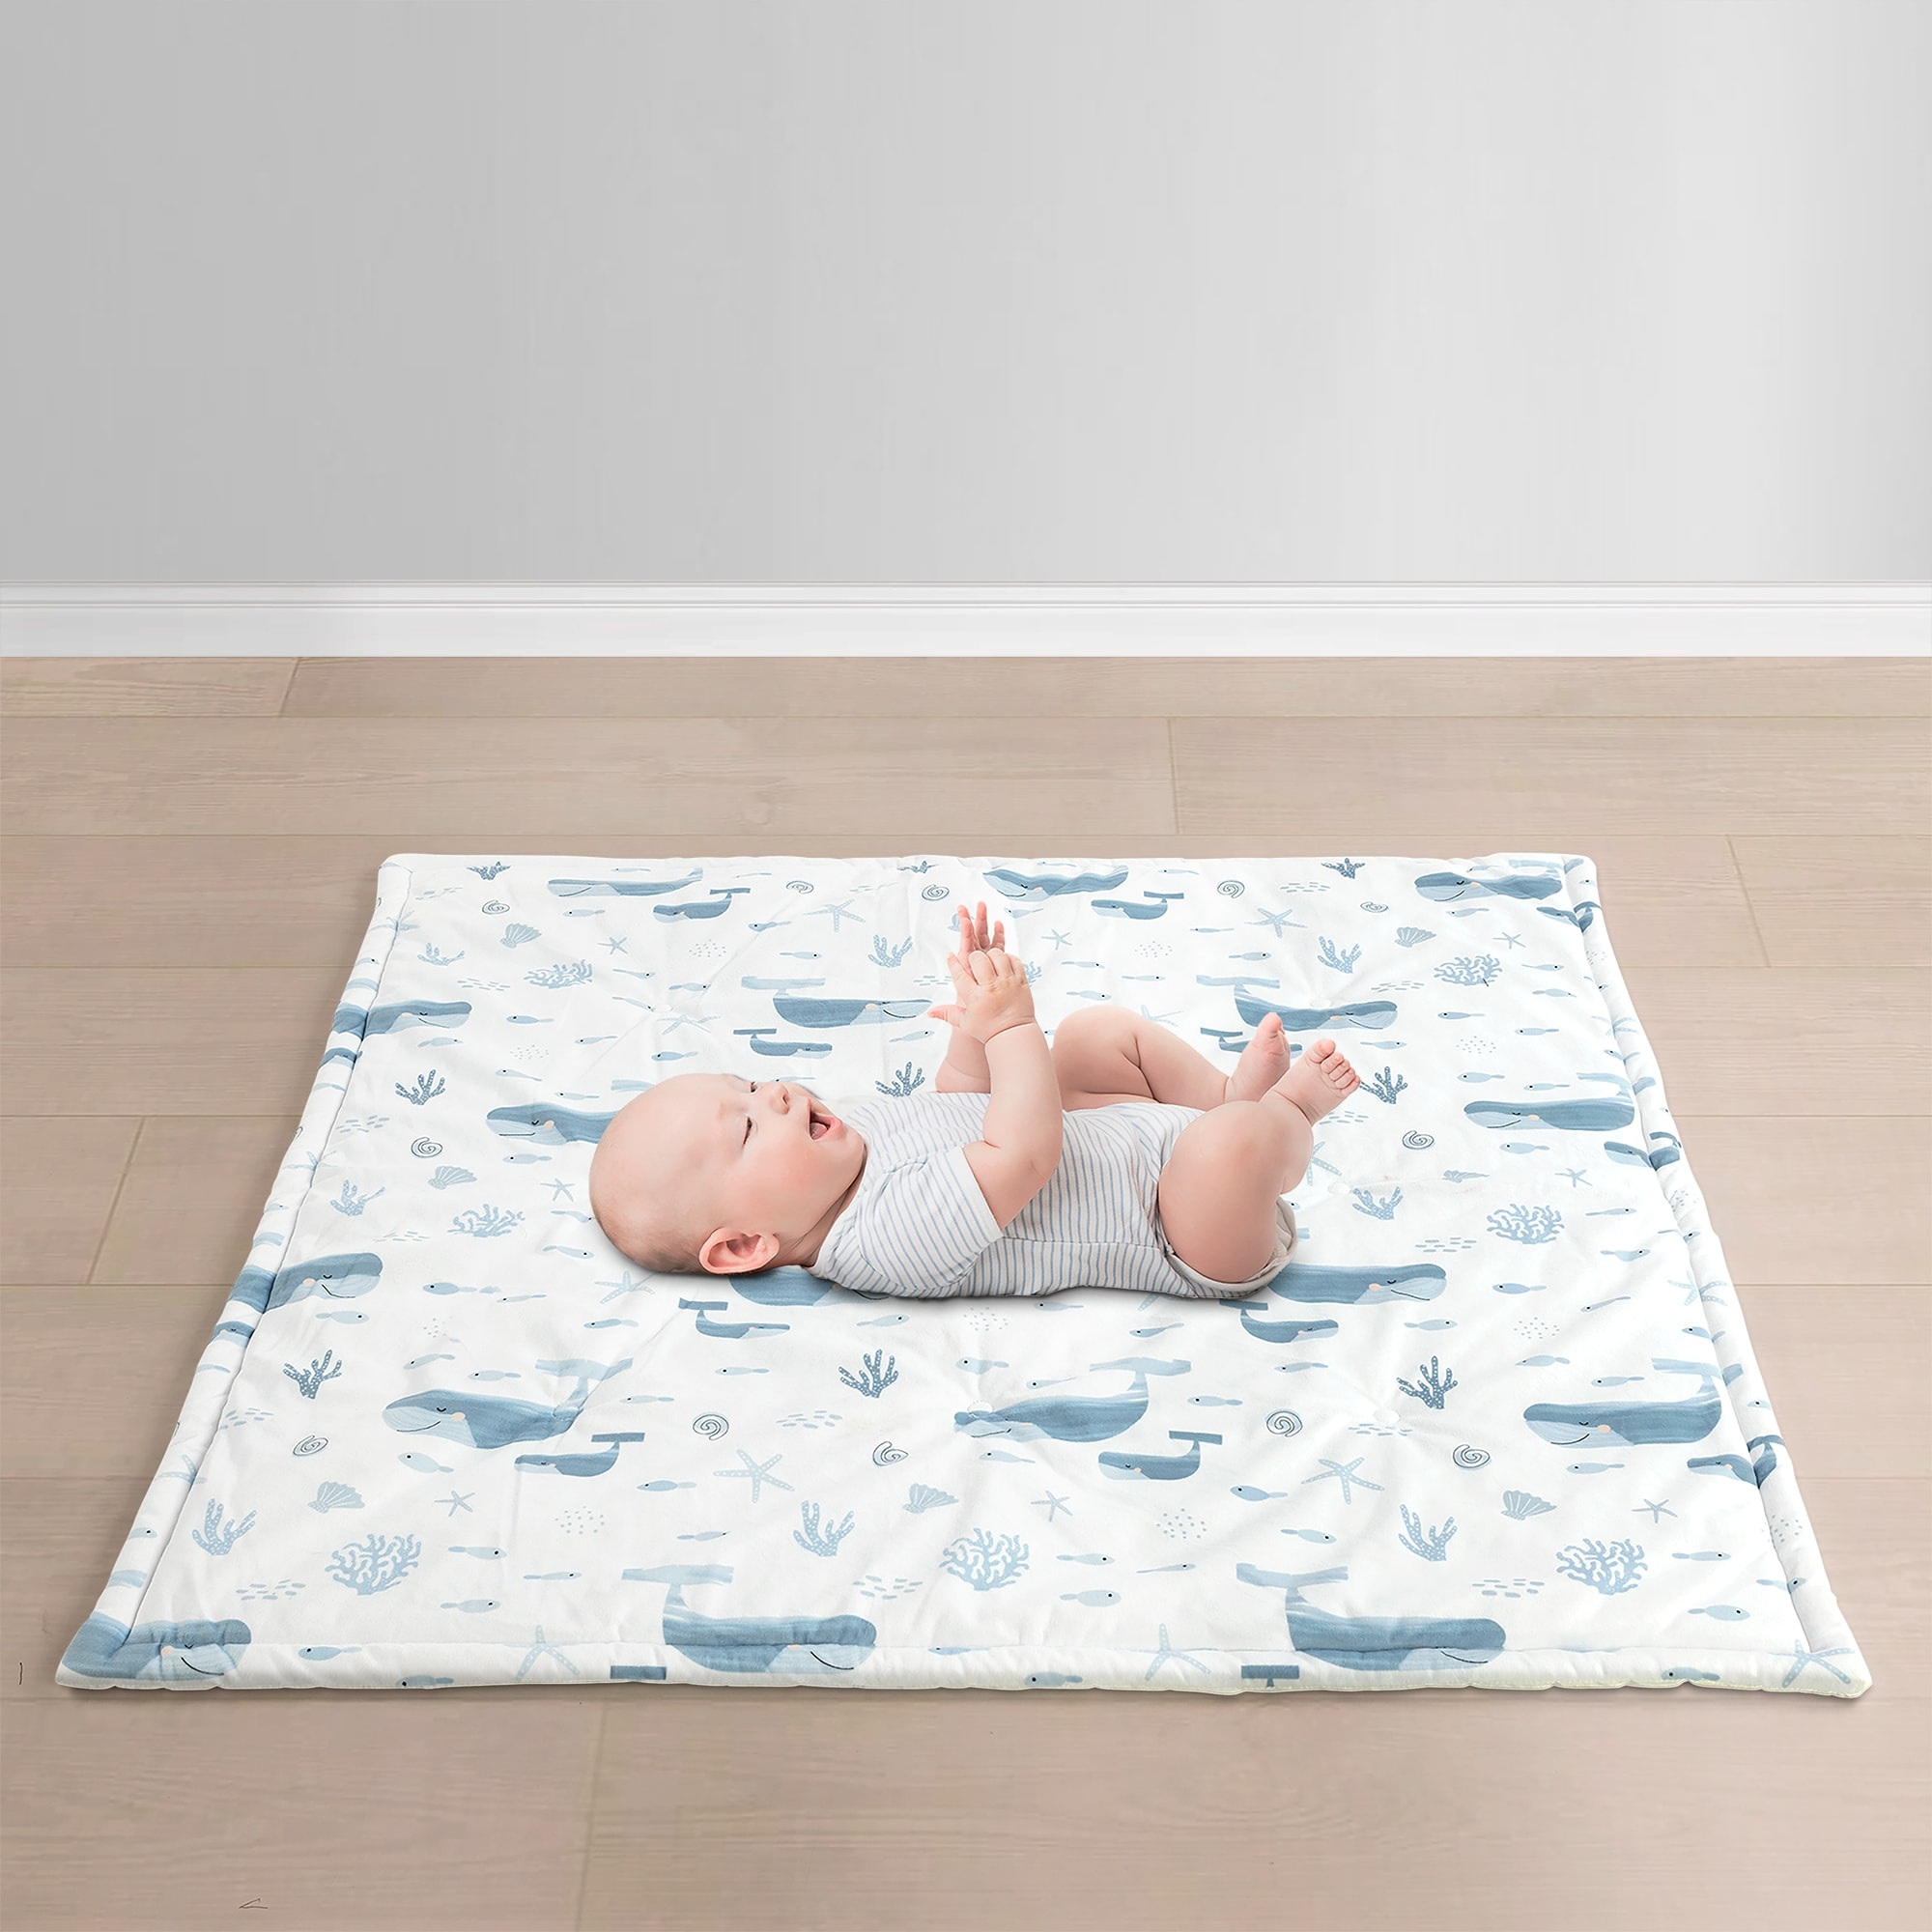 Lush Decor Seaside Baby Square With Border Play Ma...